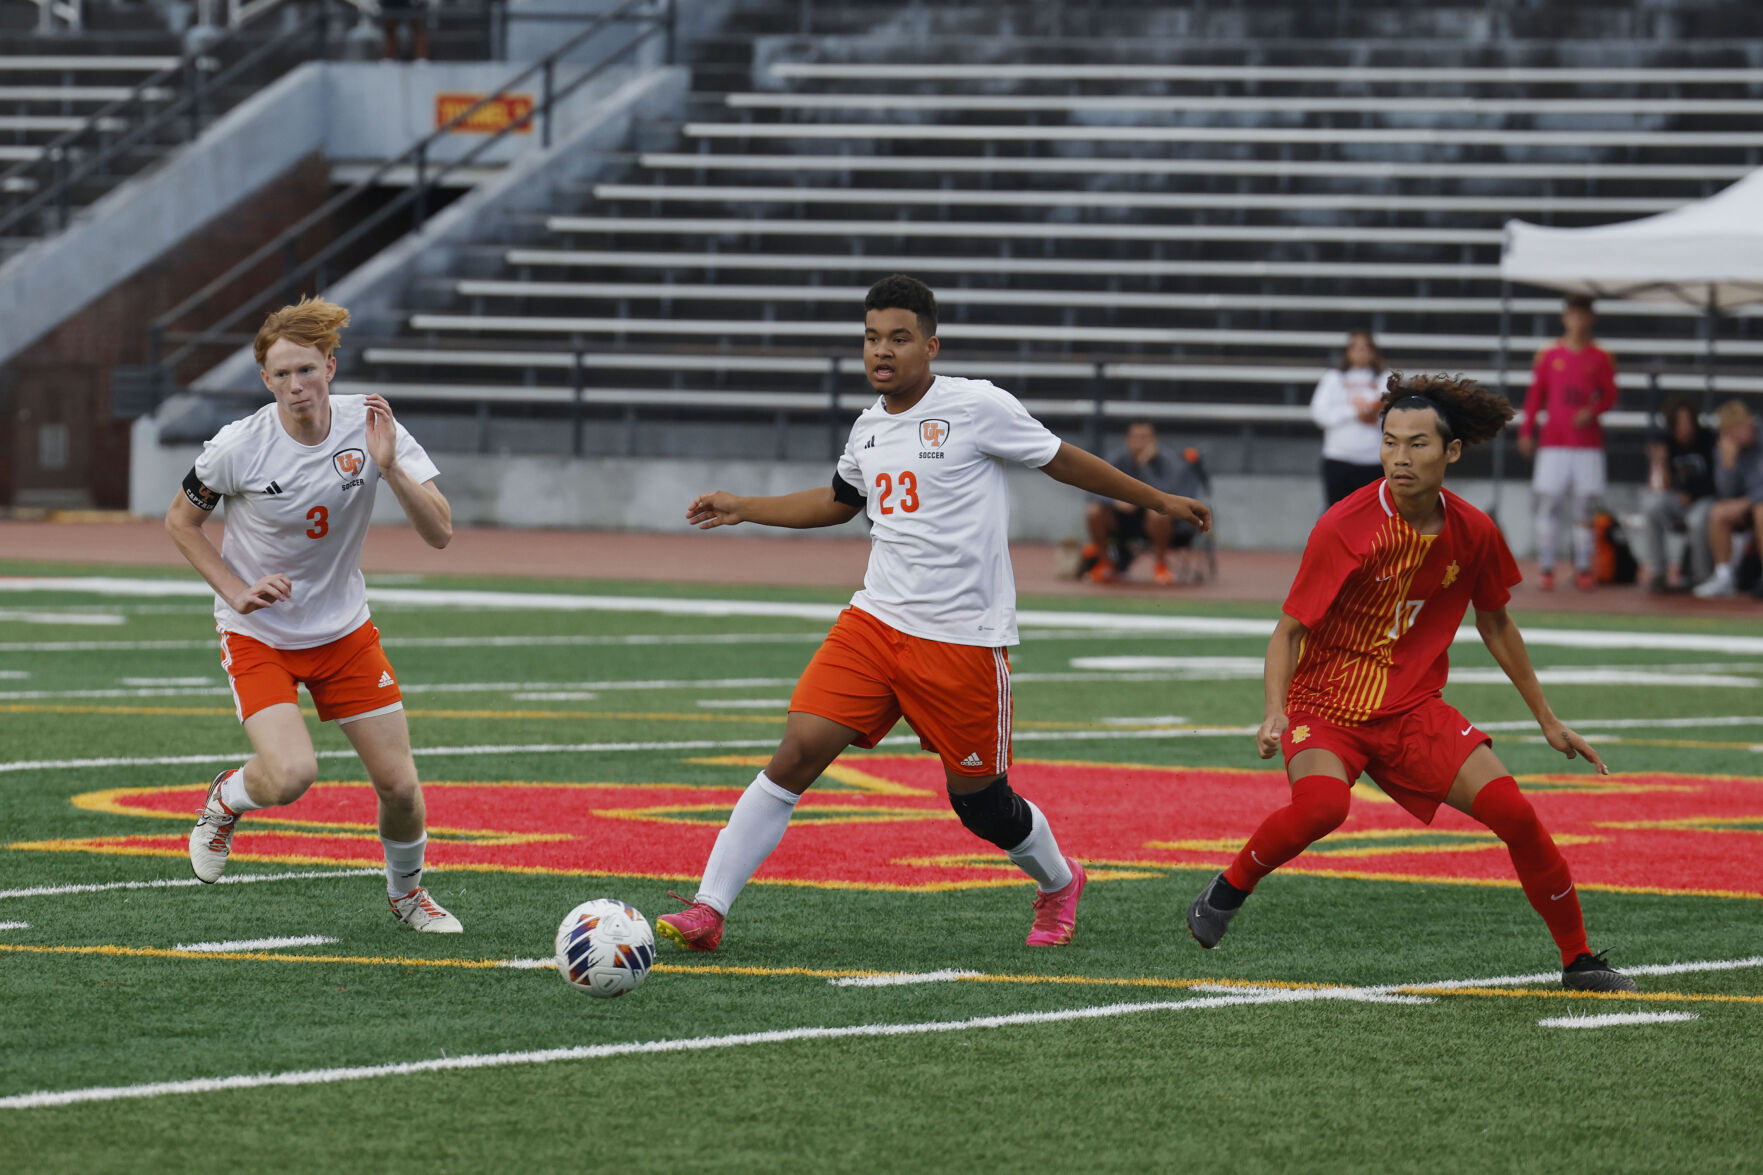 United Township Dominates Rock Island 4-1 in Western Big 6 Conference Soccer Match